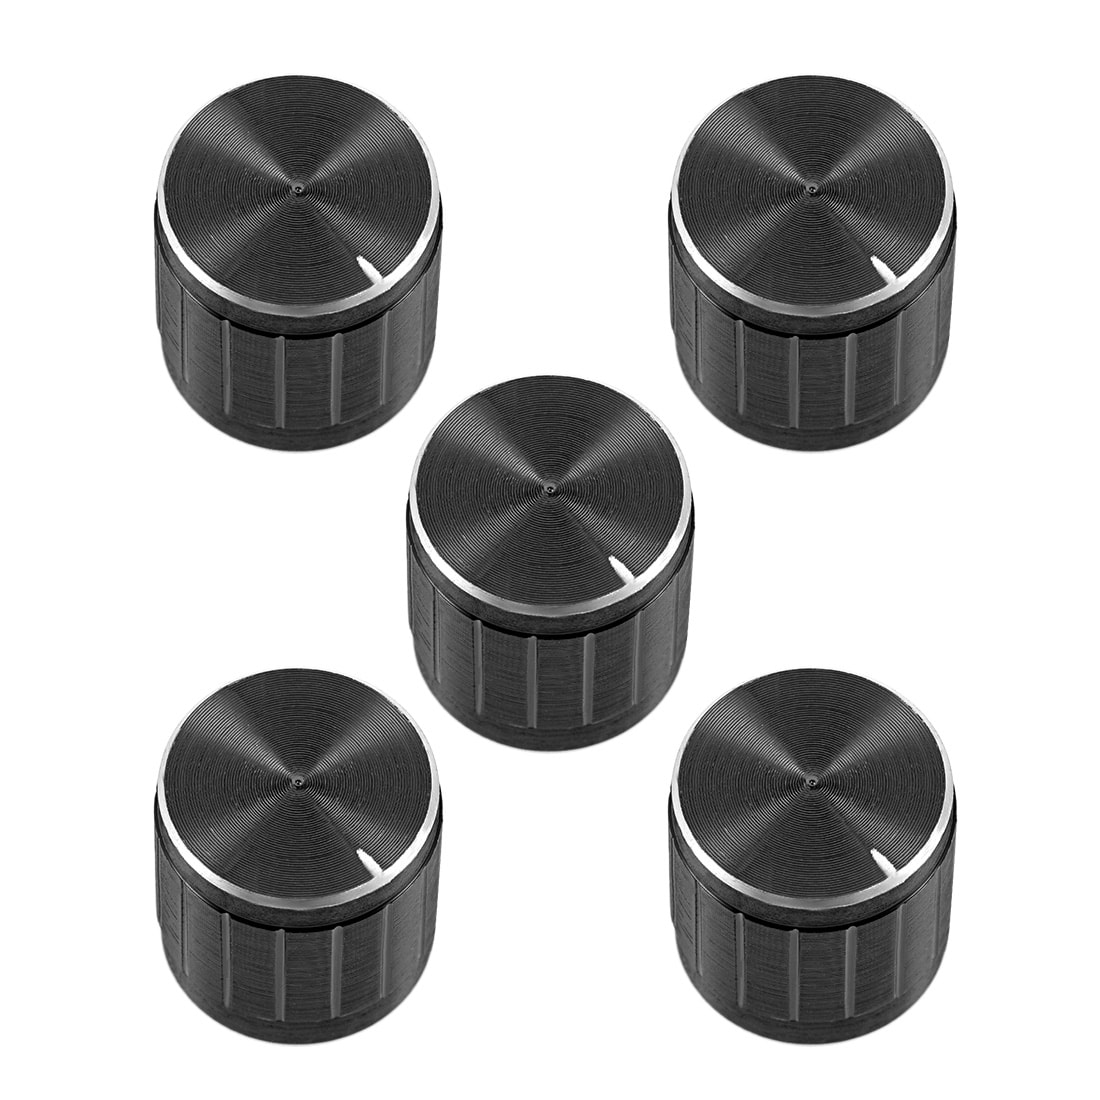 Details about   10PCS Black Knob Blue Face Plastic for Rotary Taper Potentiometer Hole 6mm U8 